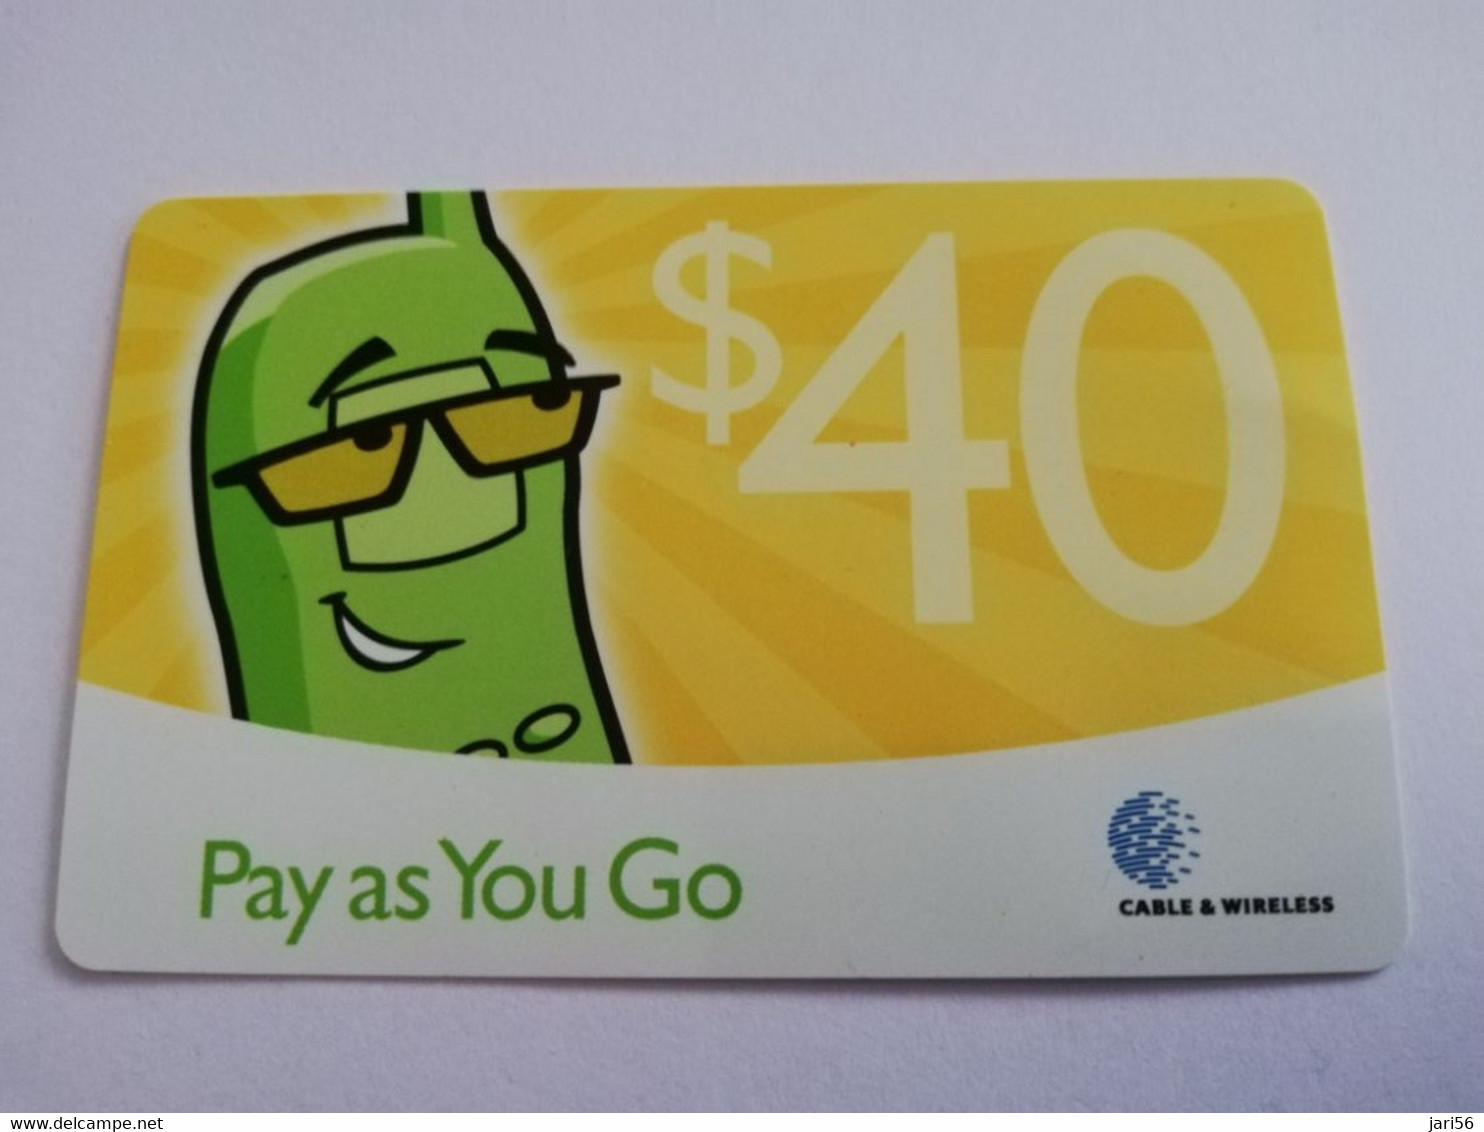 ST LUCIA   $40,- PAY AS YOU GO    Prepaid Fine Used Card  ** 8839** - St. Lucia